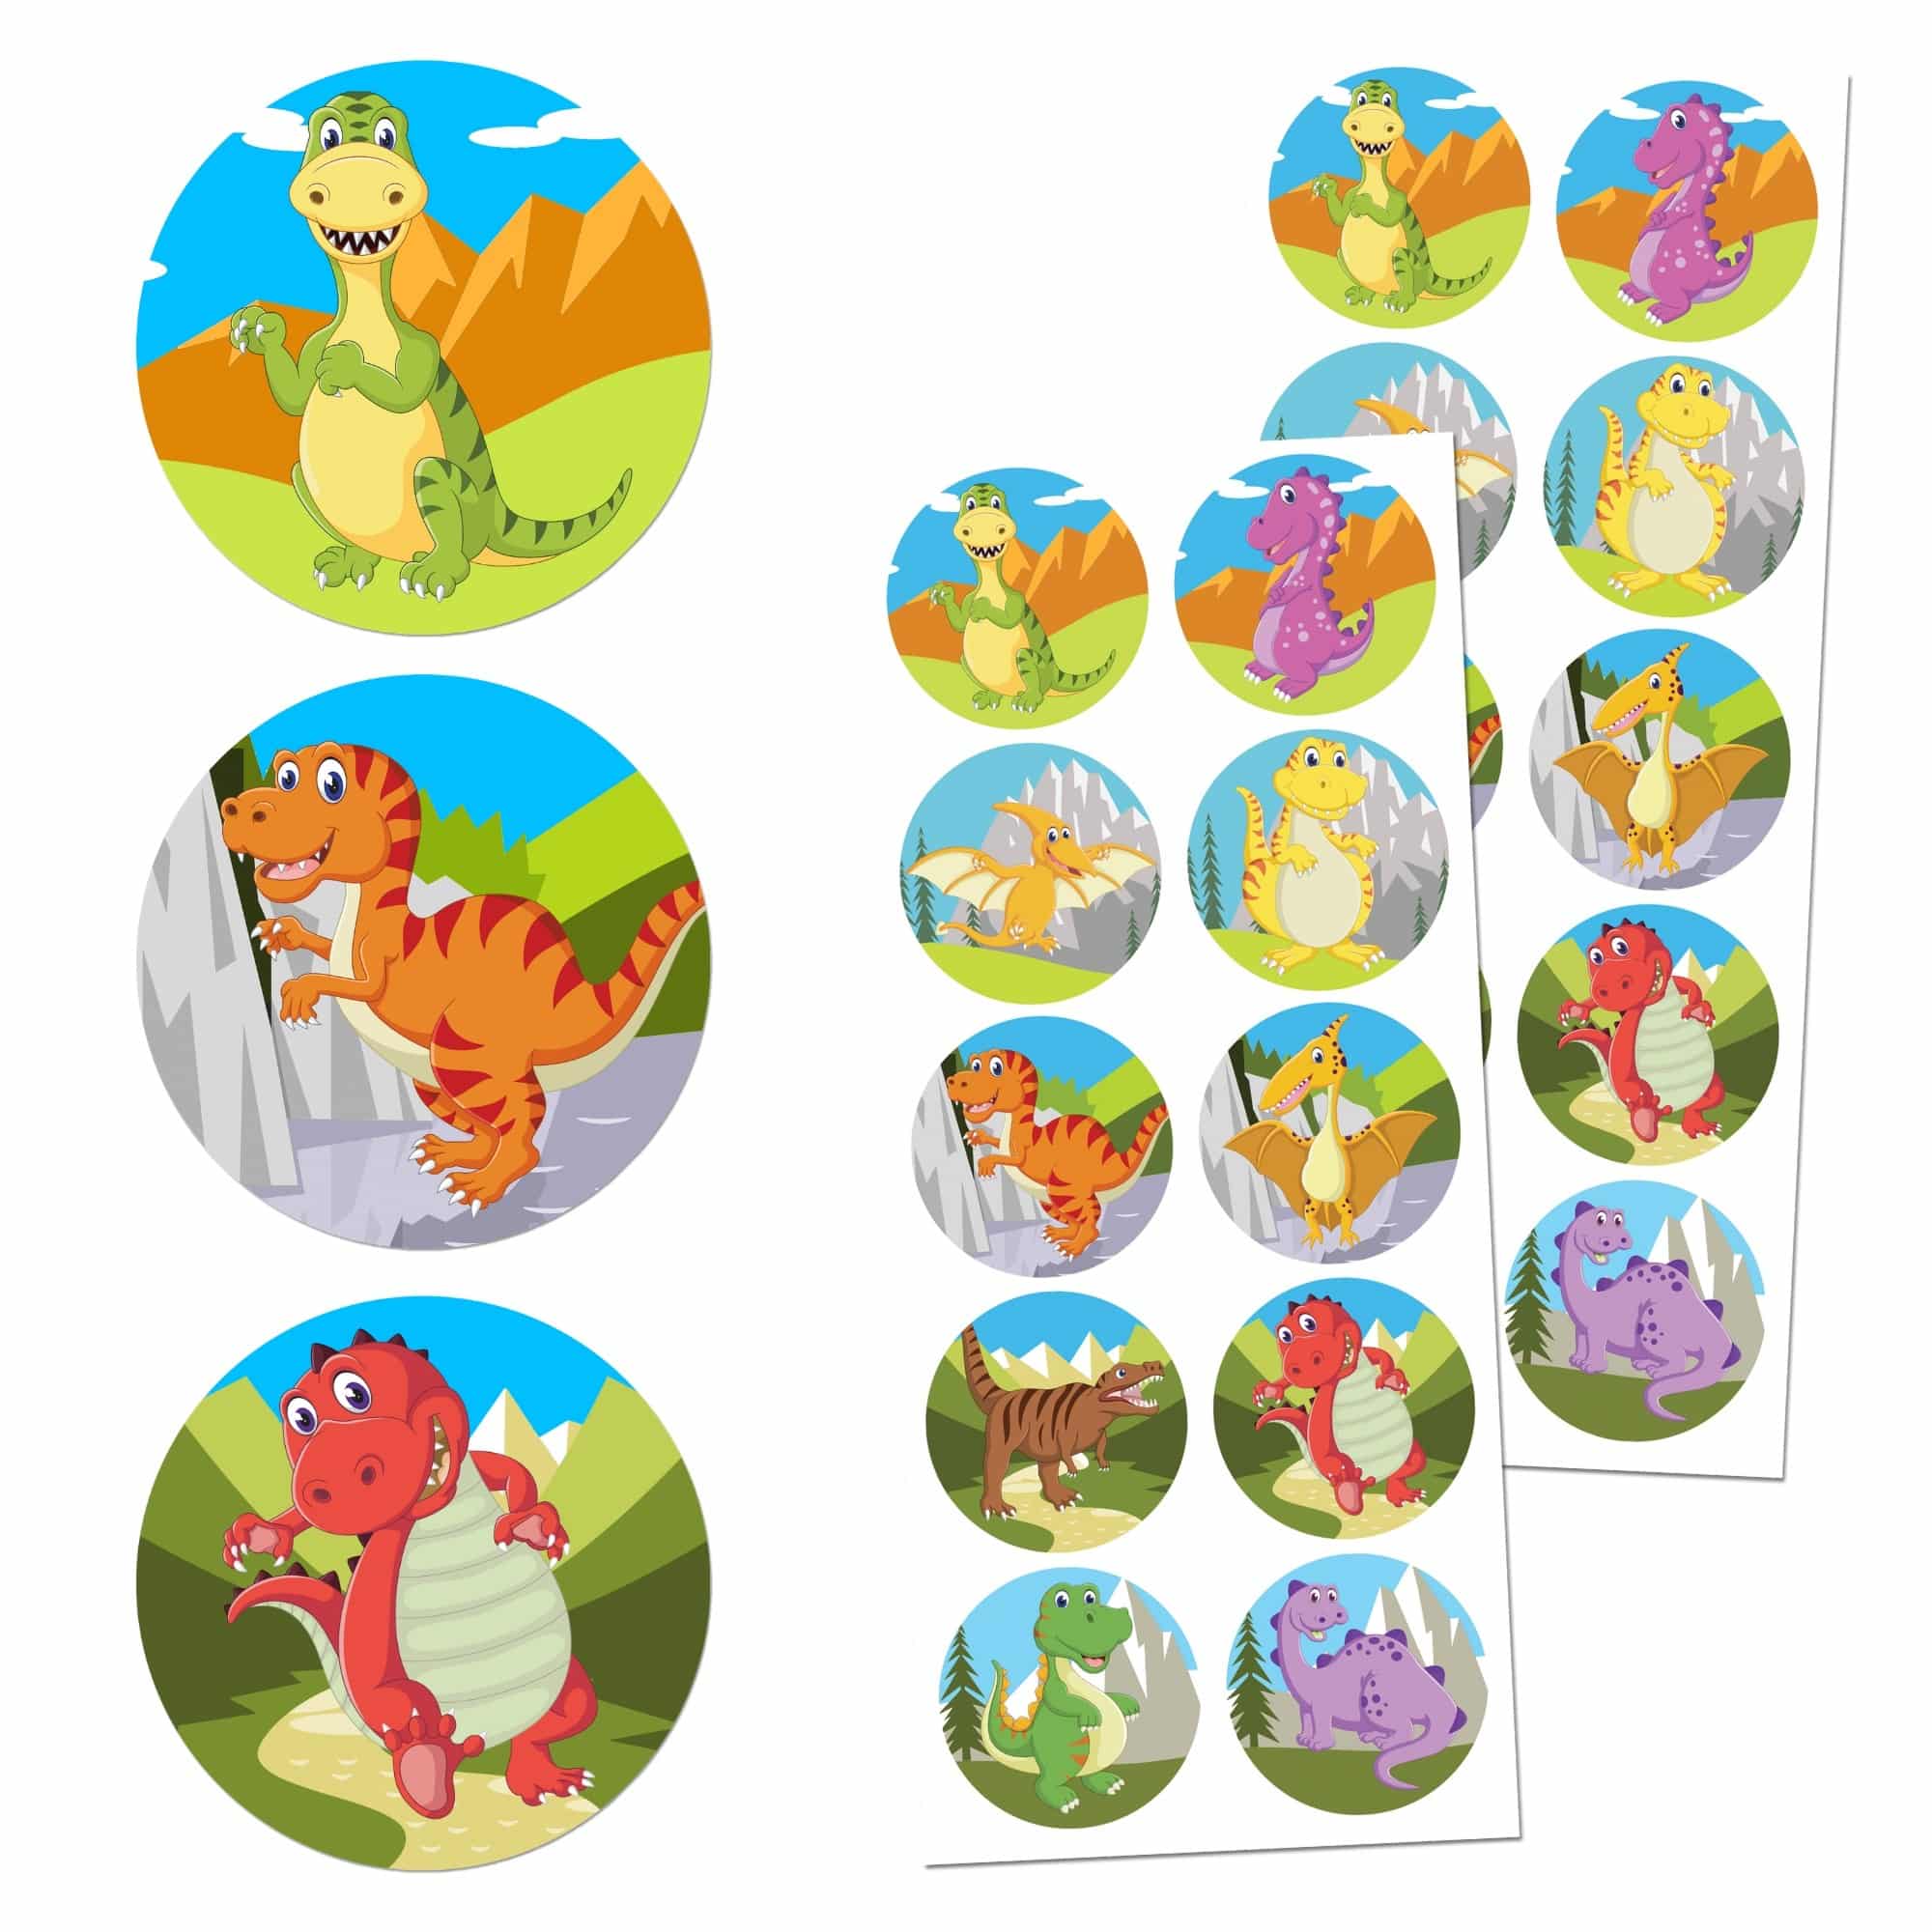  DixIt: Cute Stickers for Kids